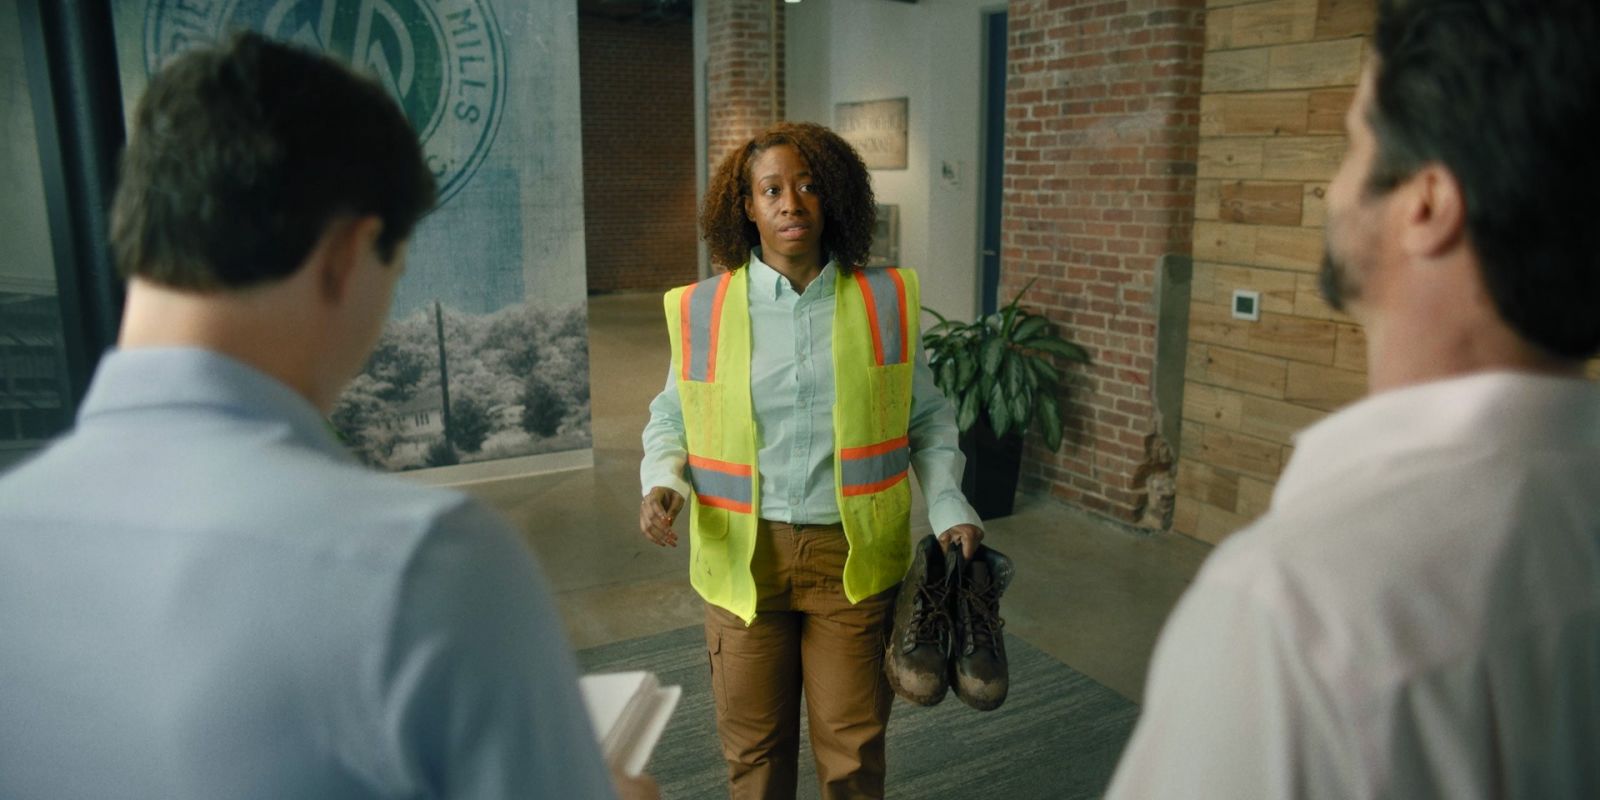 Macon draws from her experience as an engineer in the film, which follows the misadventures of Mahogany as she develops a wild and expressive split personality at the office. (Photo/Provided)